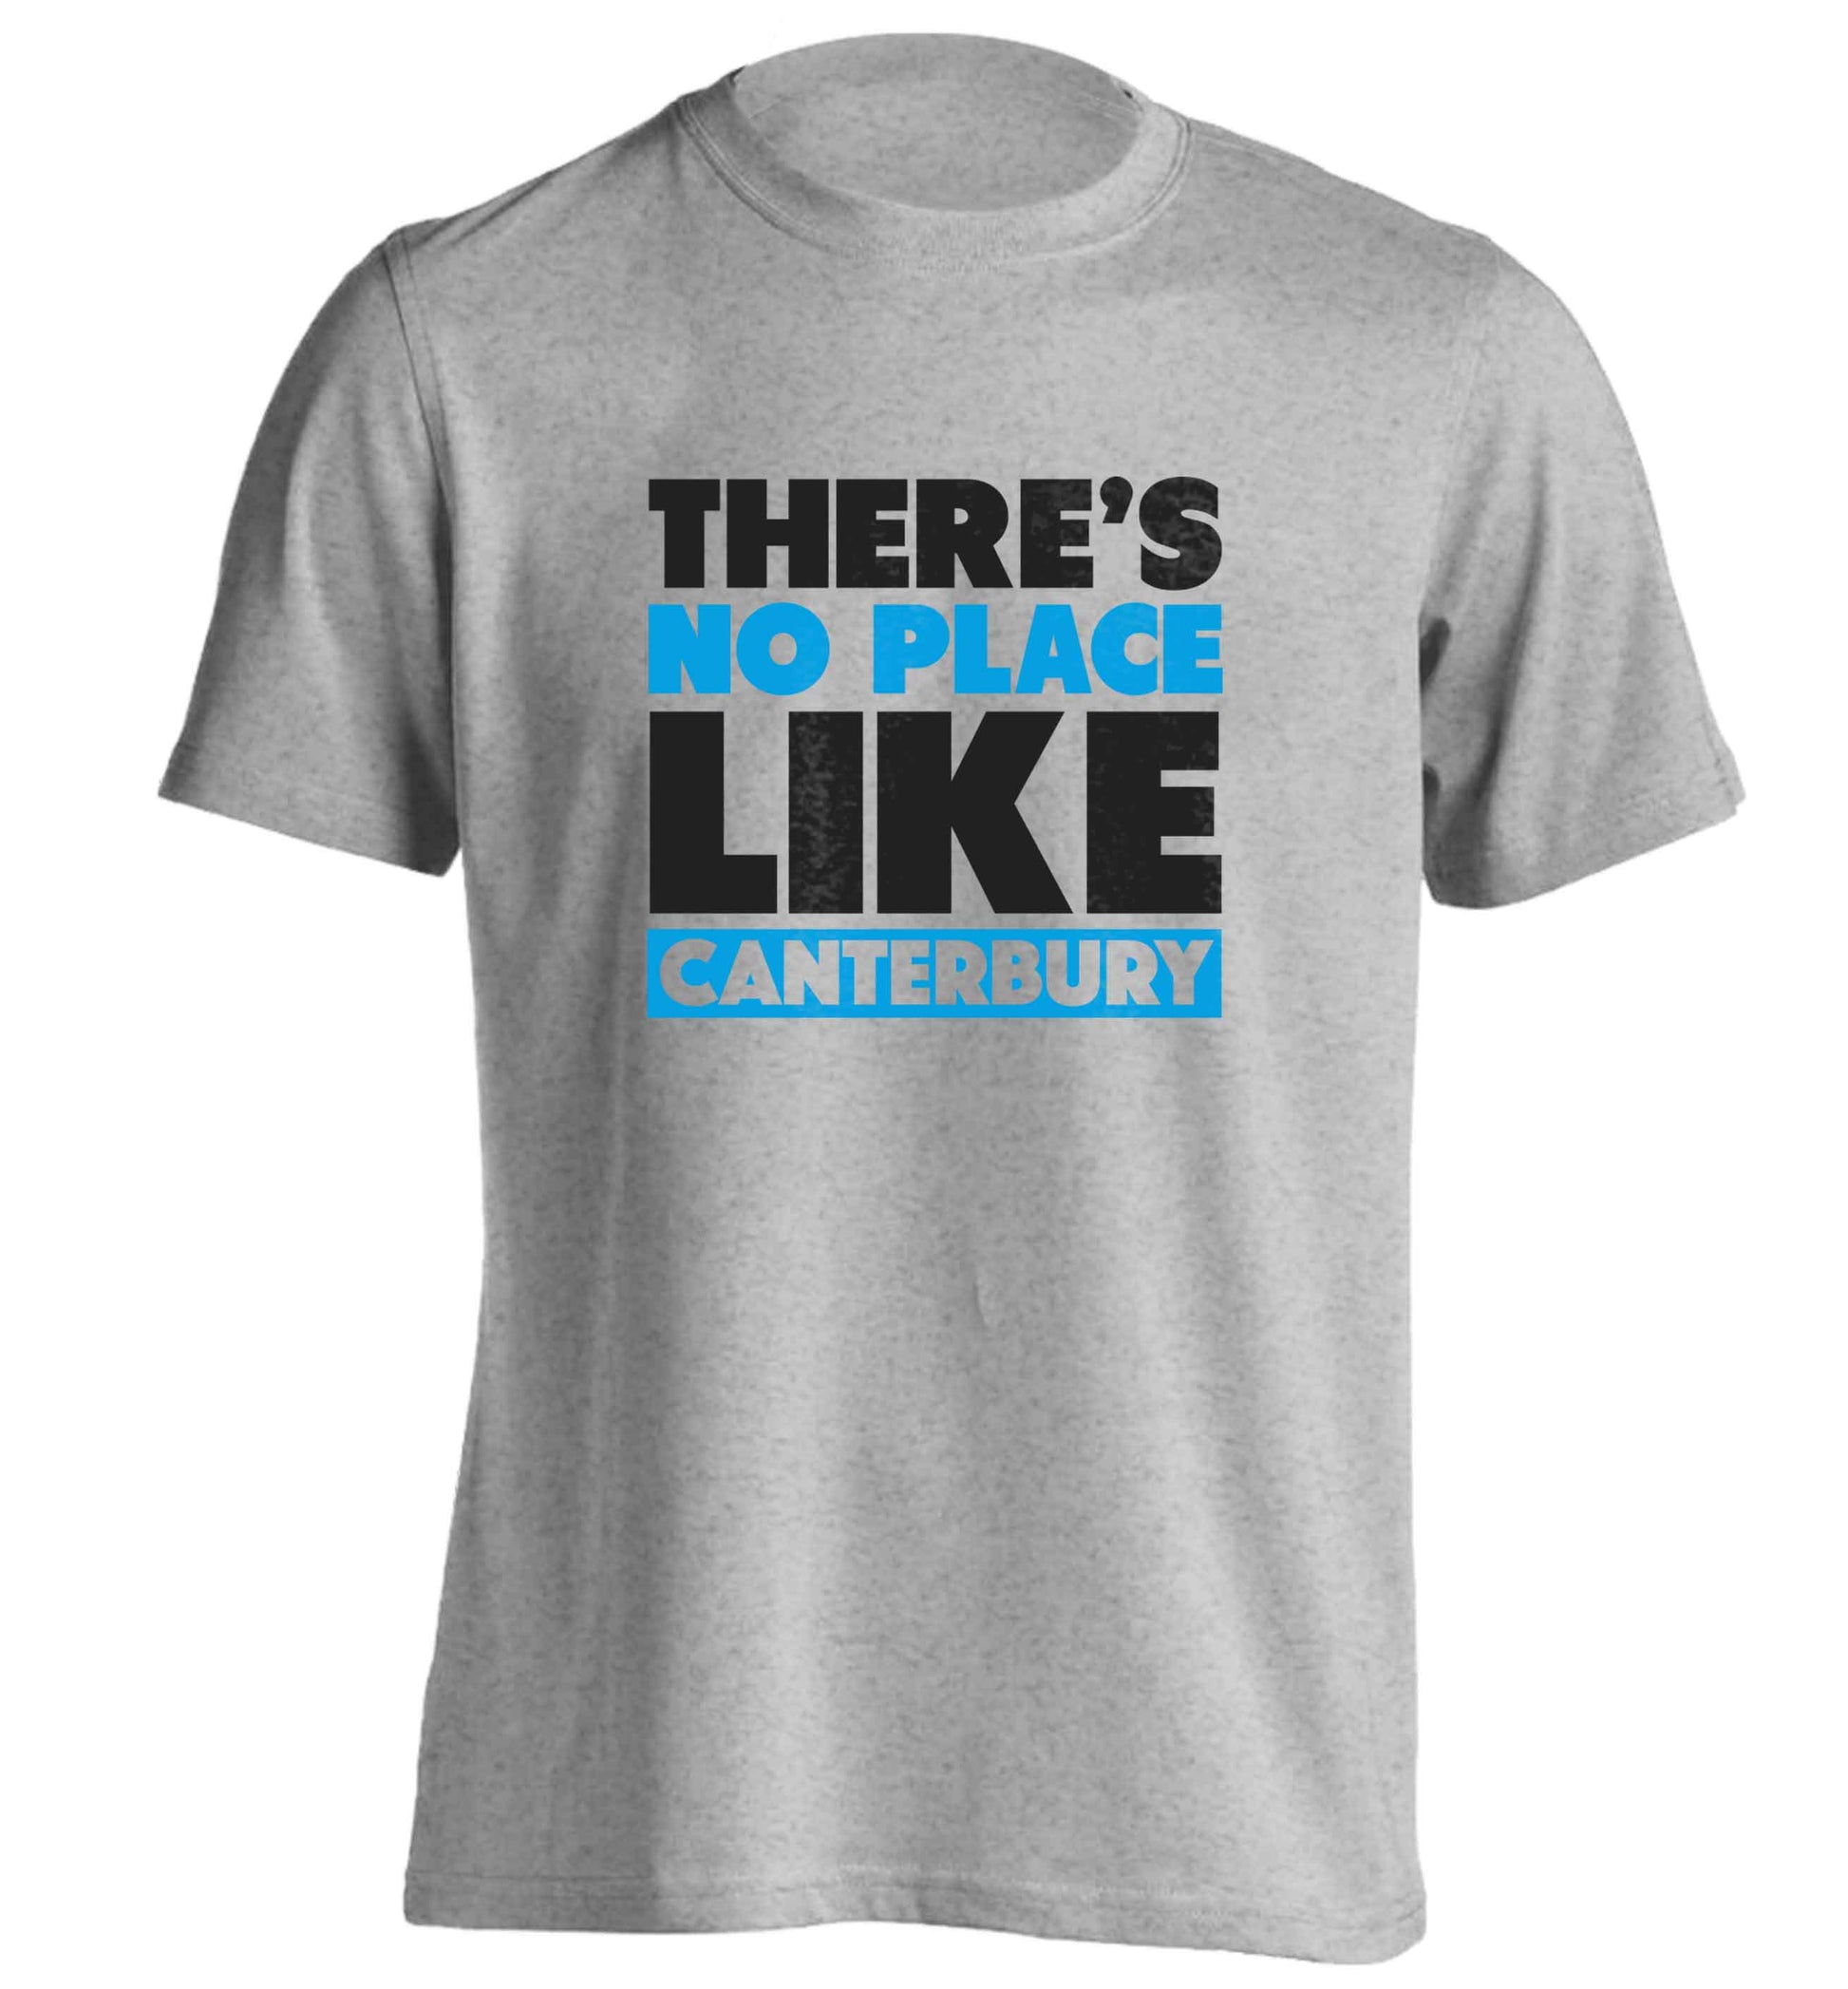 There's no place like Canterbury adults unisex grey Tshirt 2XL